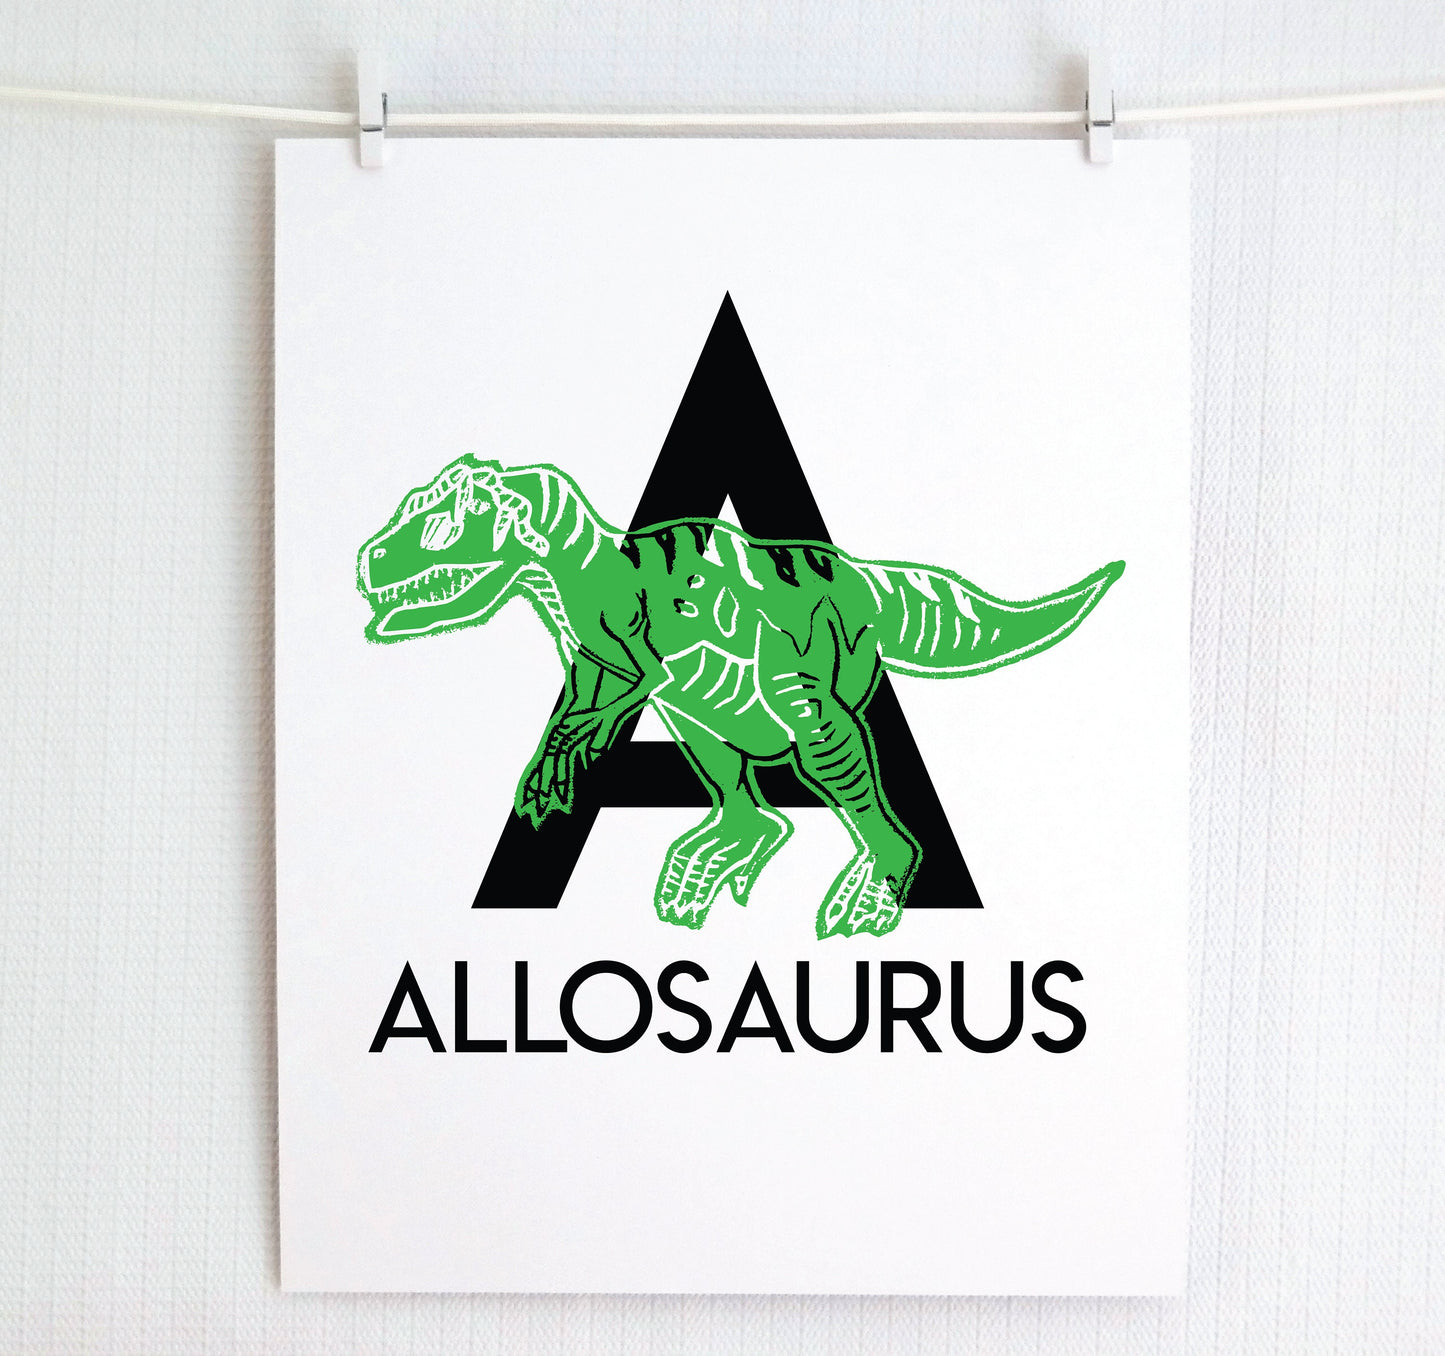 A is for Allosaurus